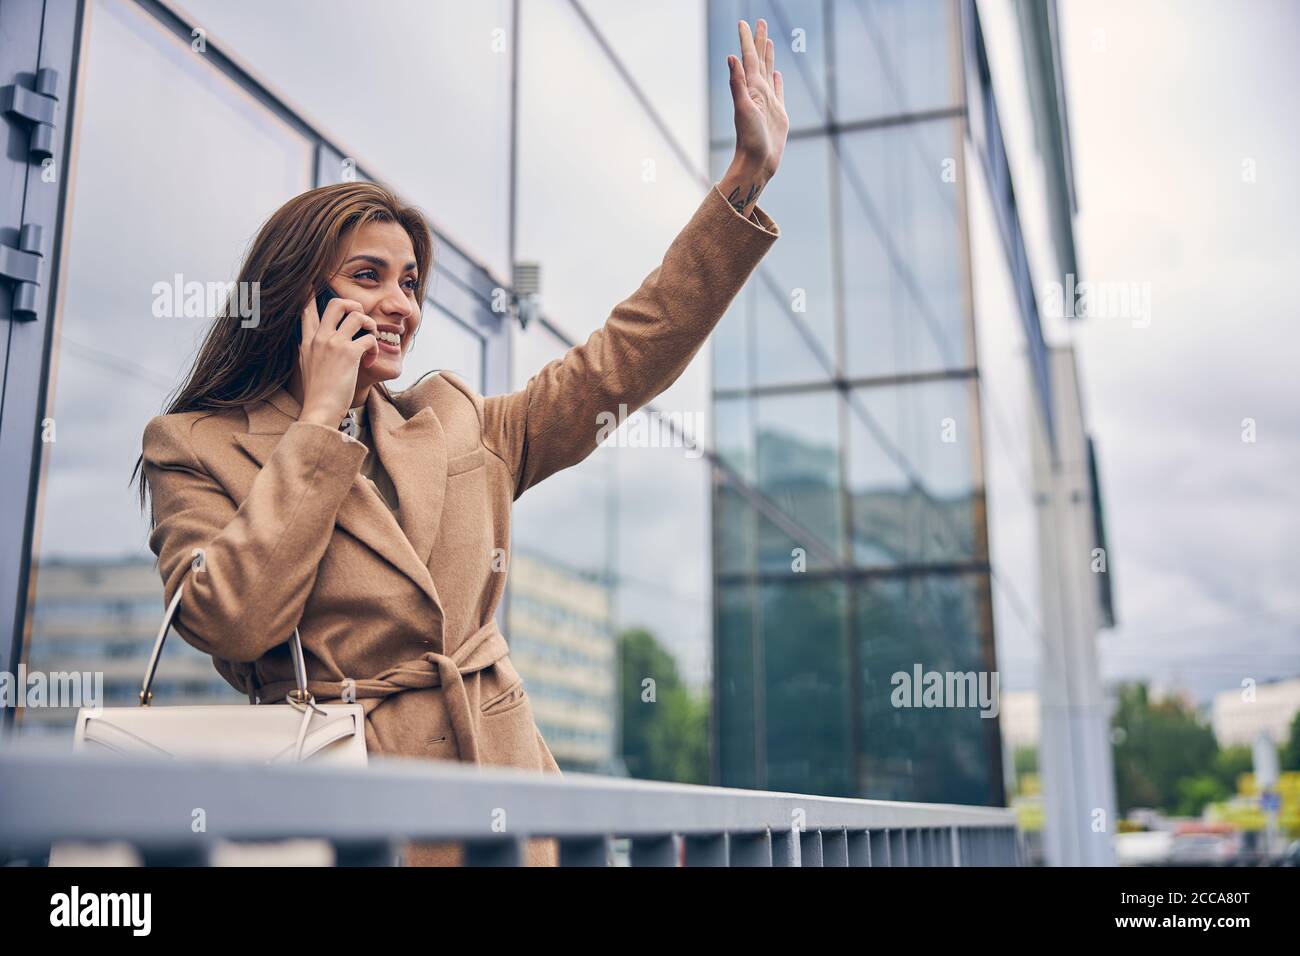 Happy lady with a raised arm standing outdoors Stock Photo